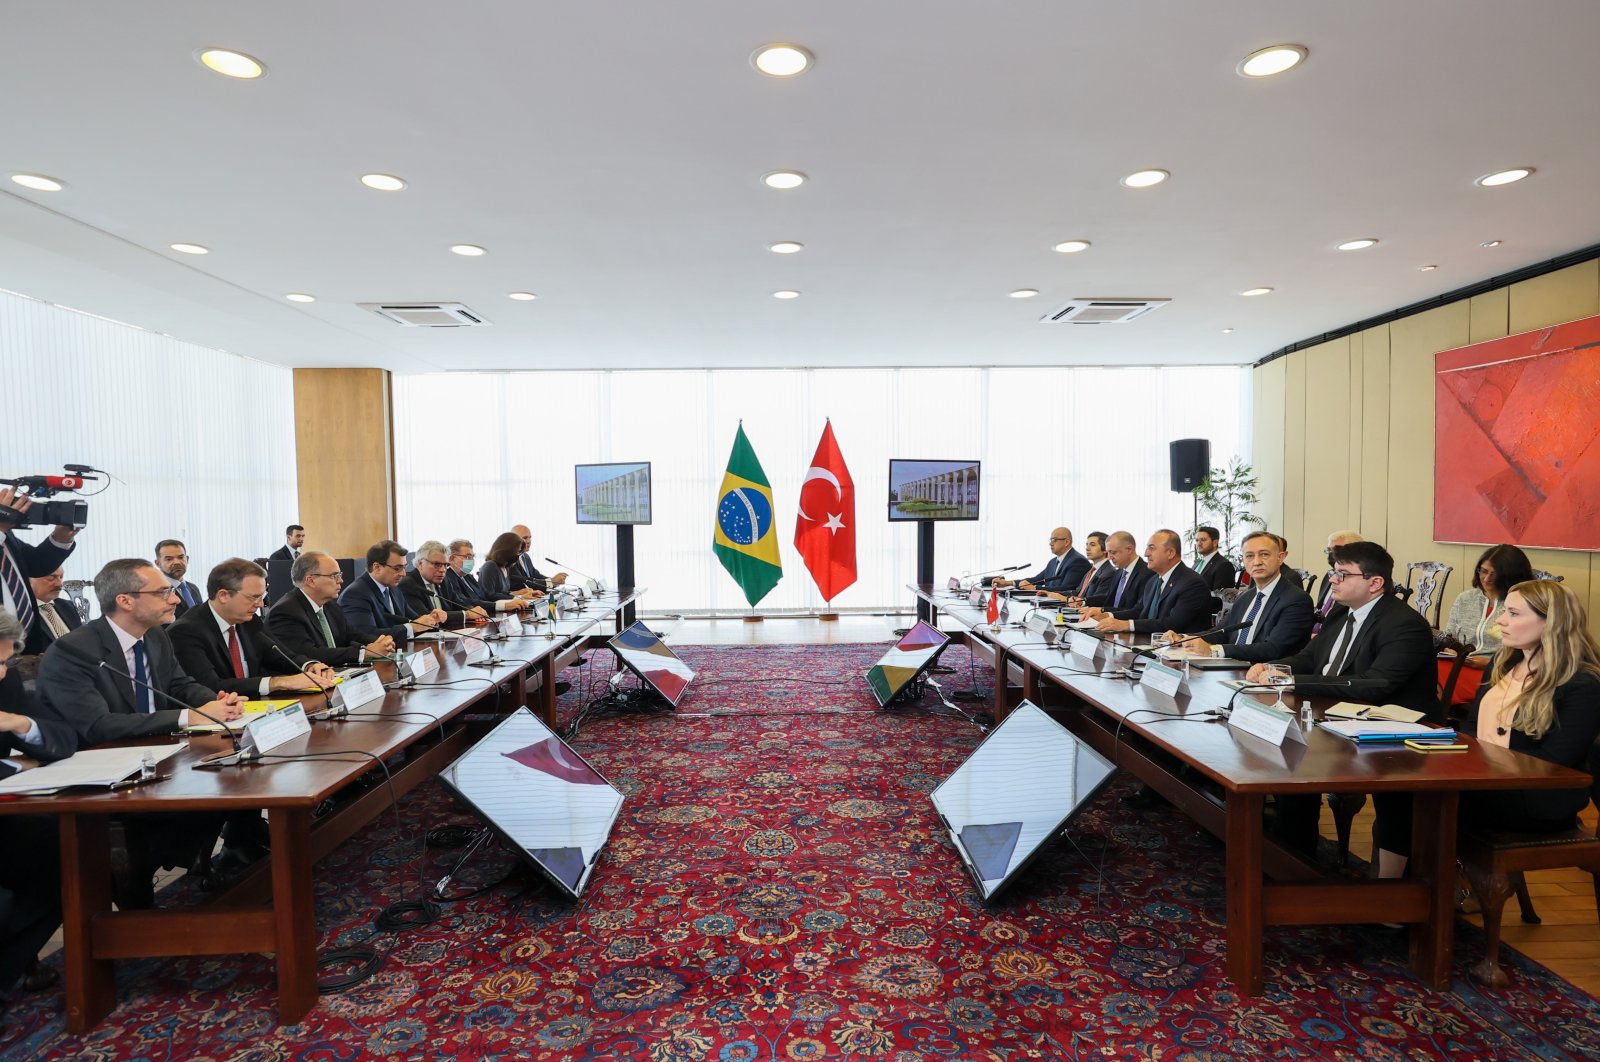 Delegations led by Foreign Minister Mevlüt Çavuşoülu (4th R) and his Brazilian counterpart Carlos Franca (5th from L) meet in Brasilia, Brazil, April 25, 2022. (AA Photo)